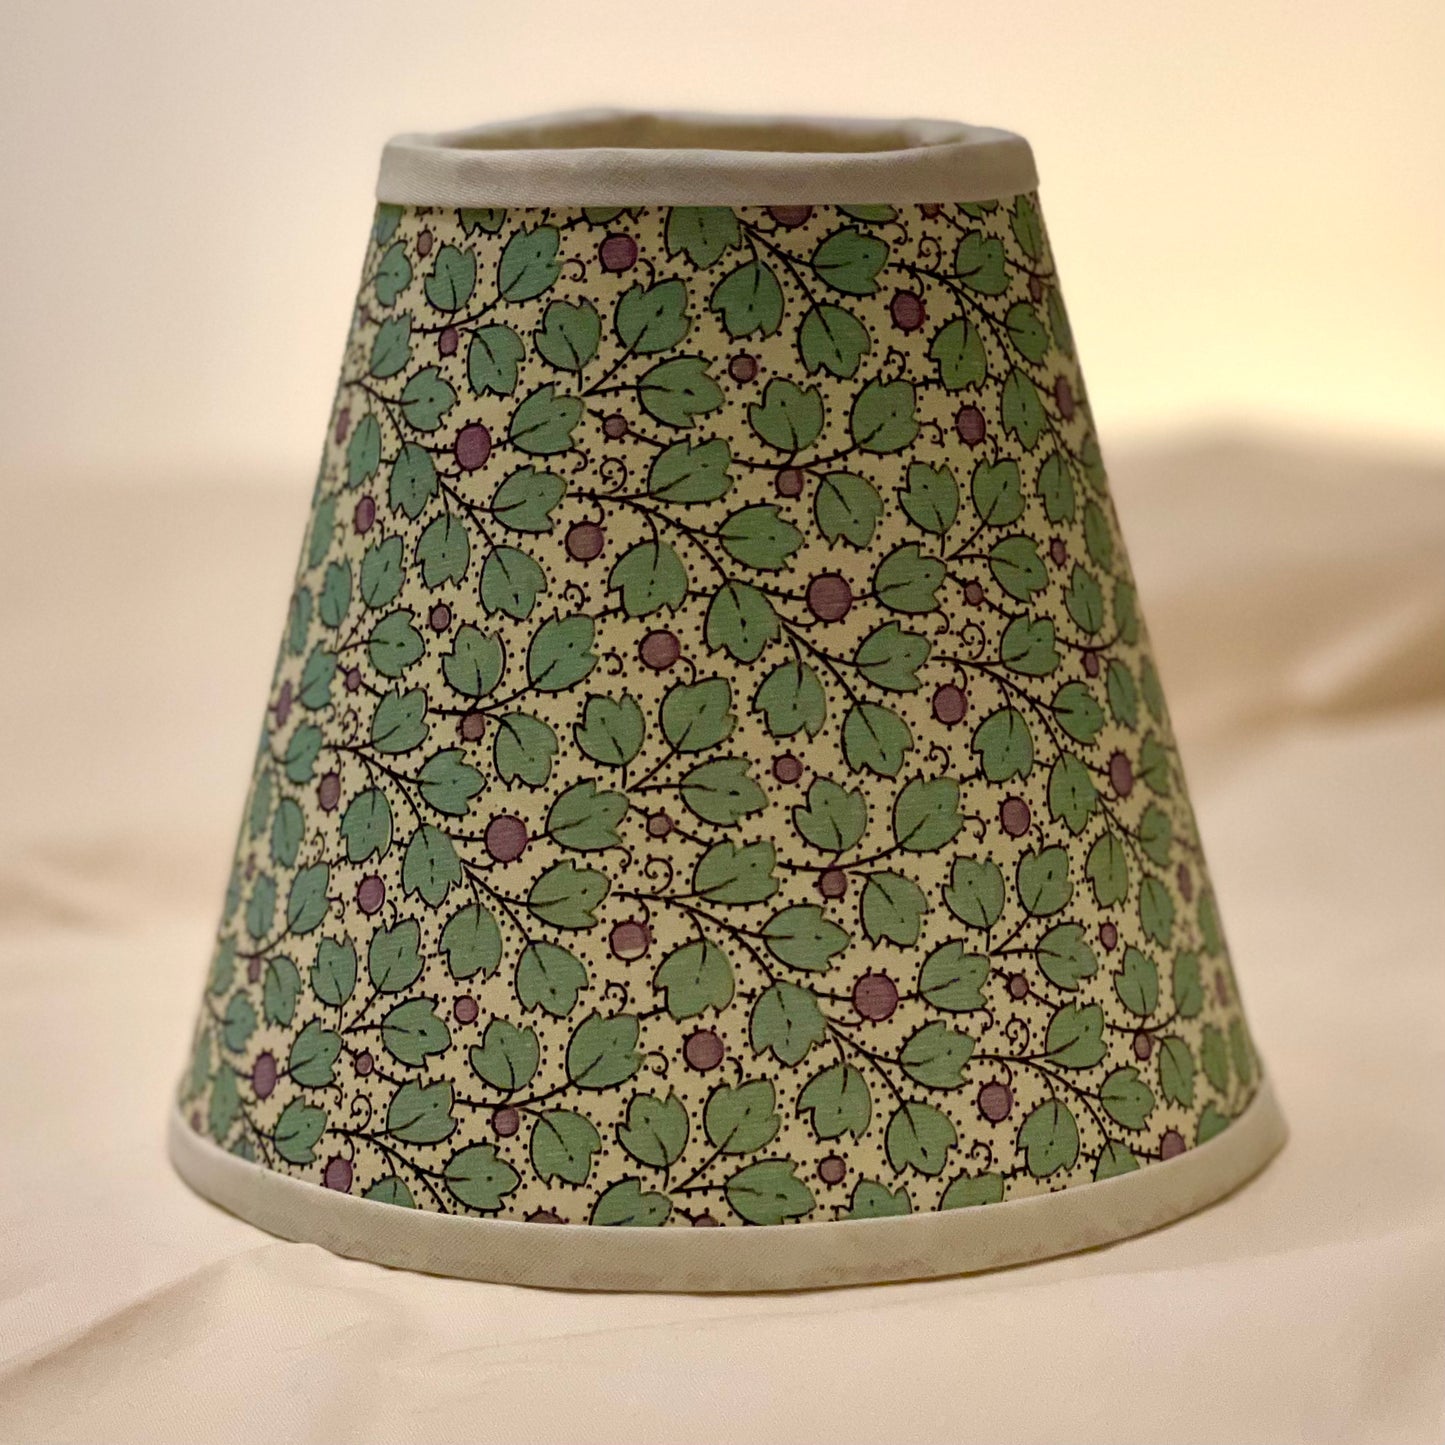 Small Clip-On Lampshade. Patterned Paper from Italy. Lilac Berry and Minty Green Leaf. White Trim.